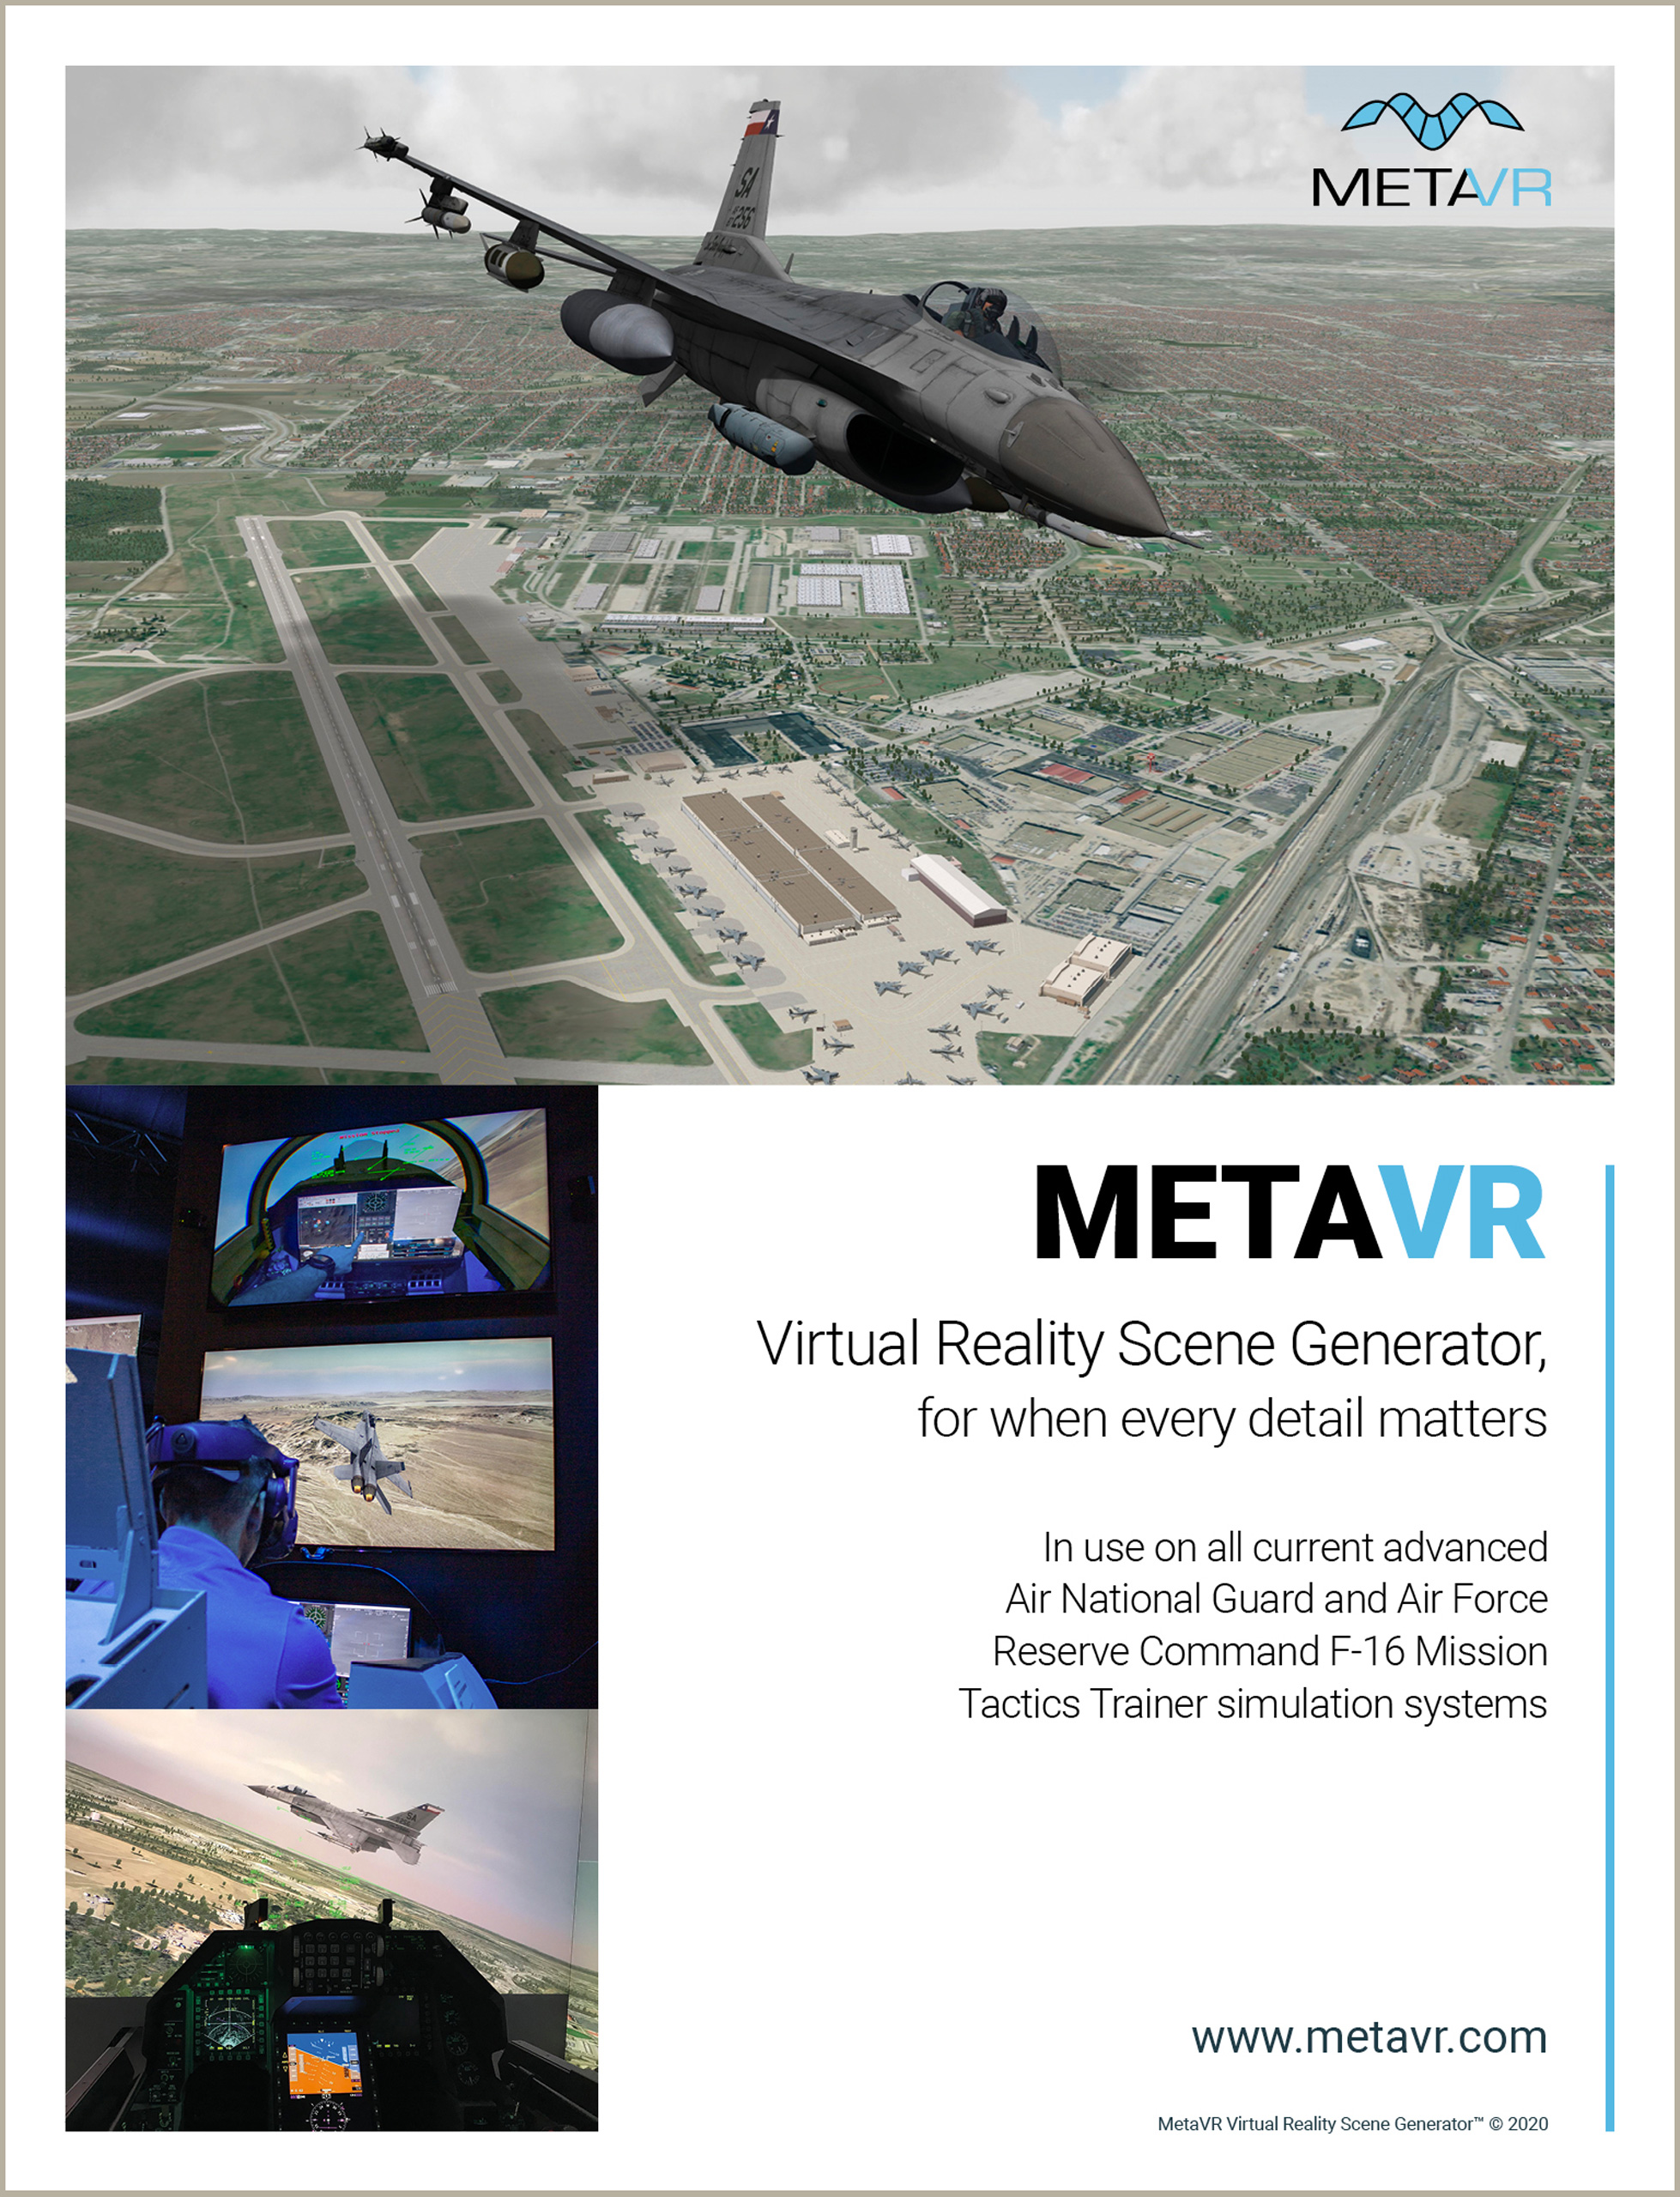 MetaVR ad in March 2020 issue of Shephard's Military Technology and Simulation News (MTSN).